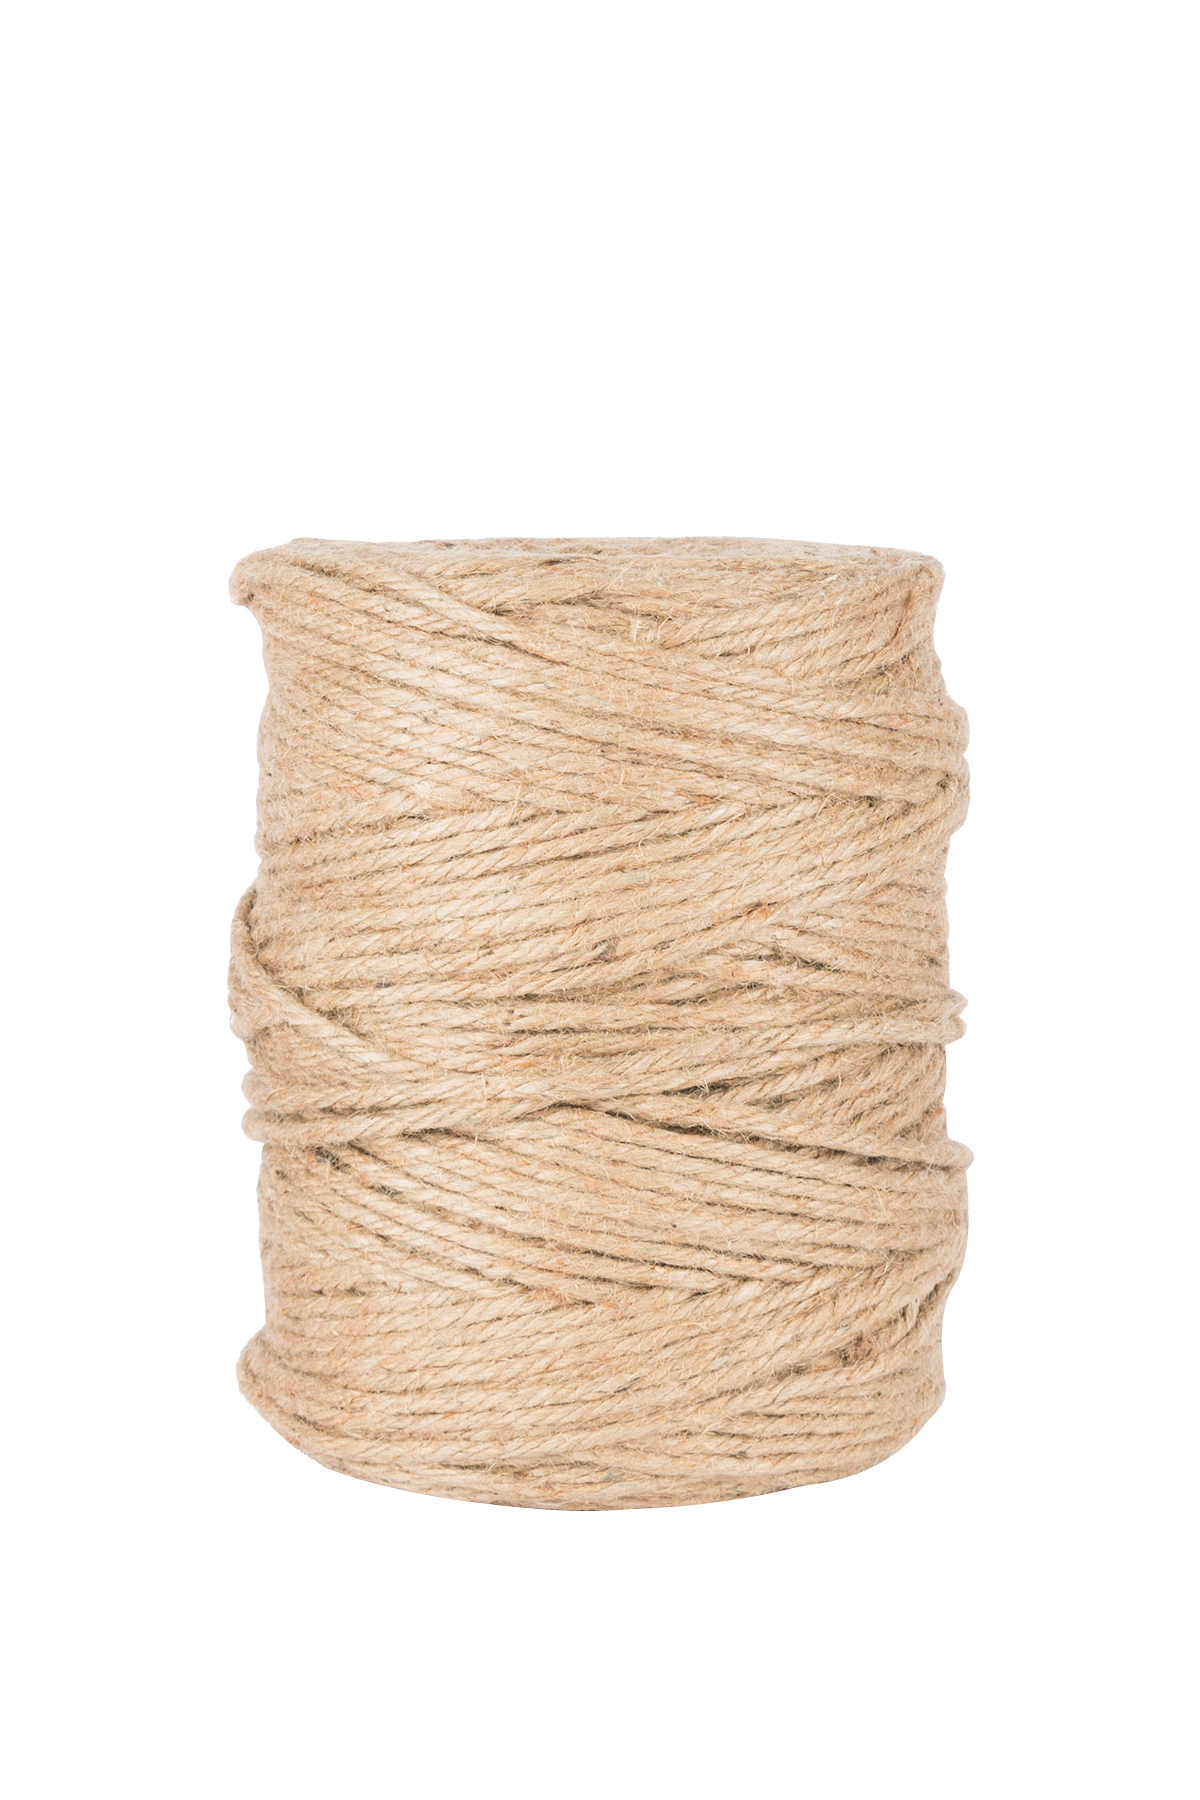 2mm 600ft Colored Natural Jute Twine String for Gift Wrapping